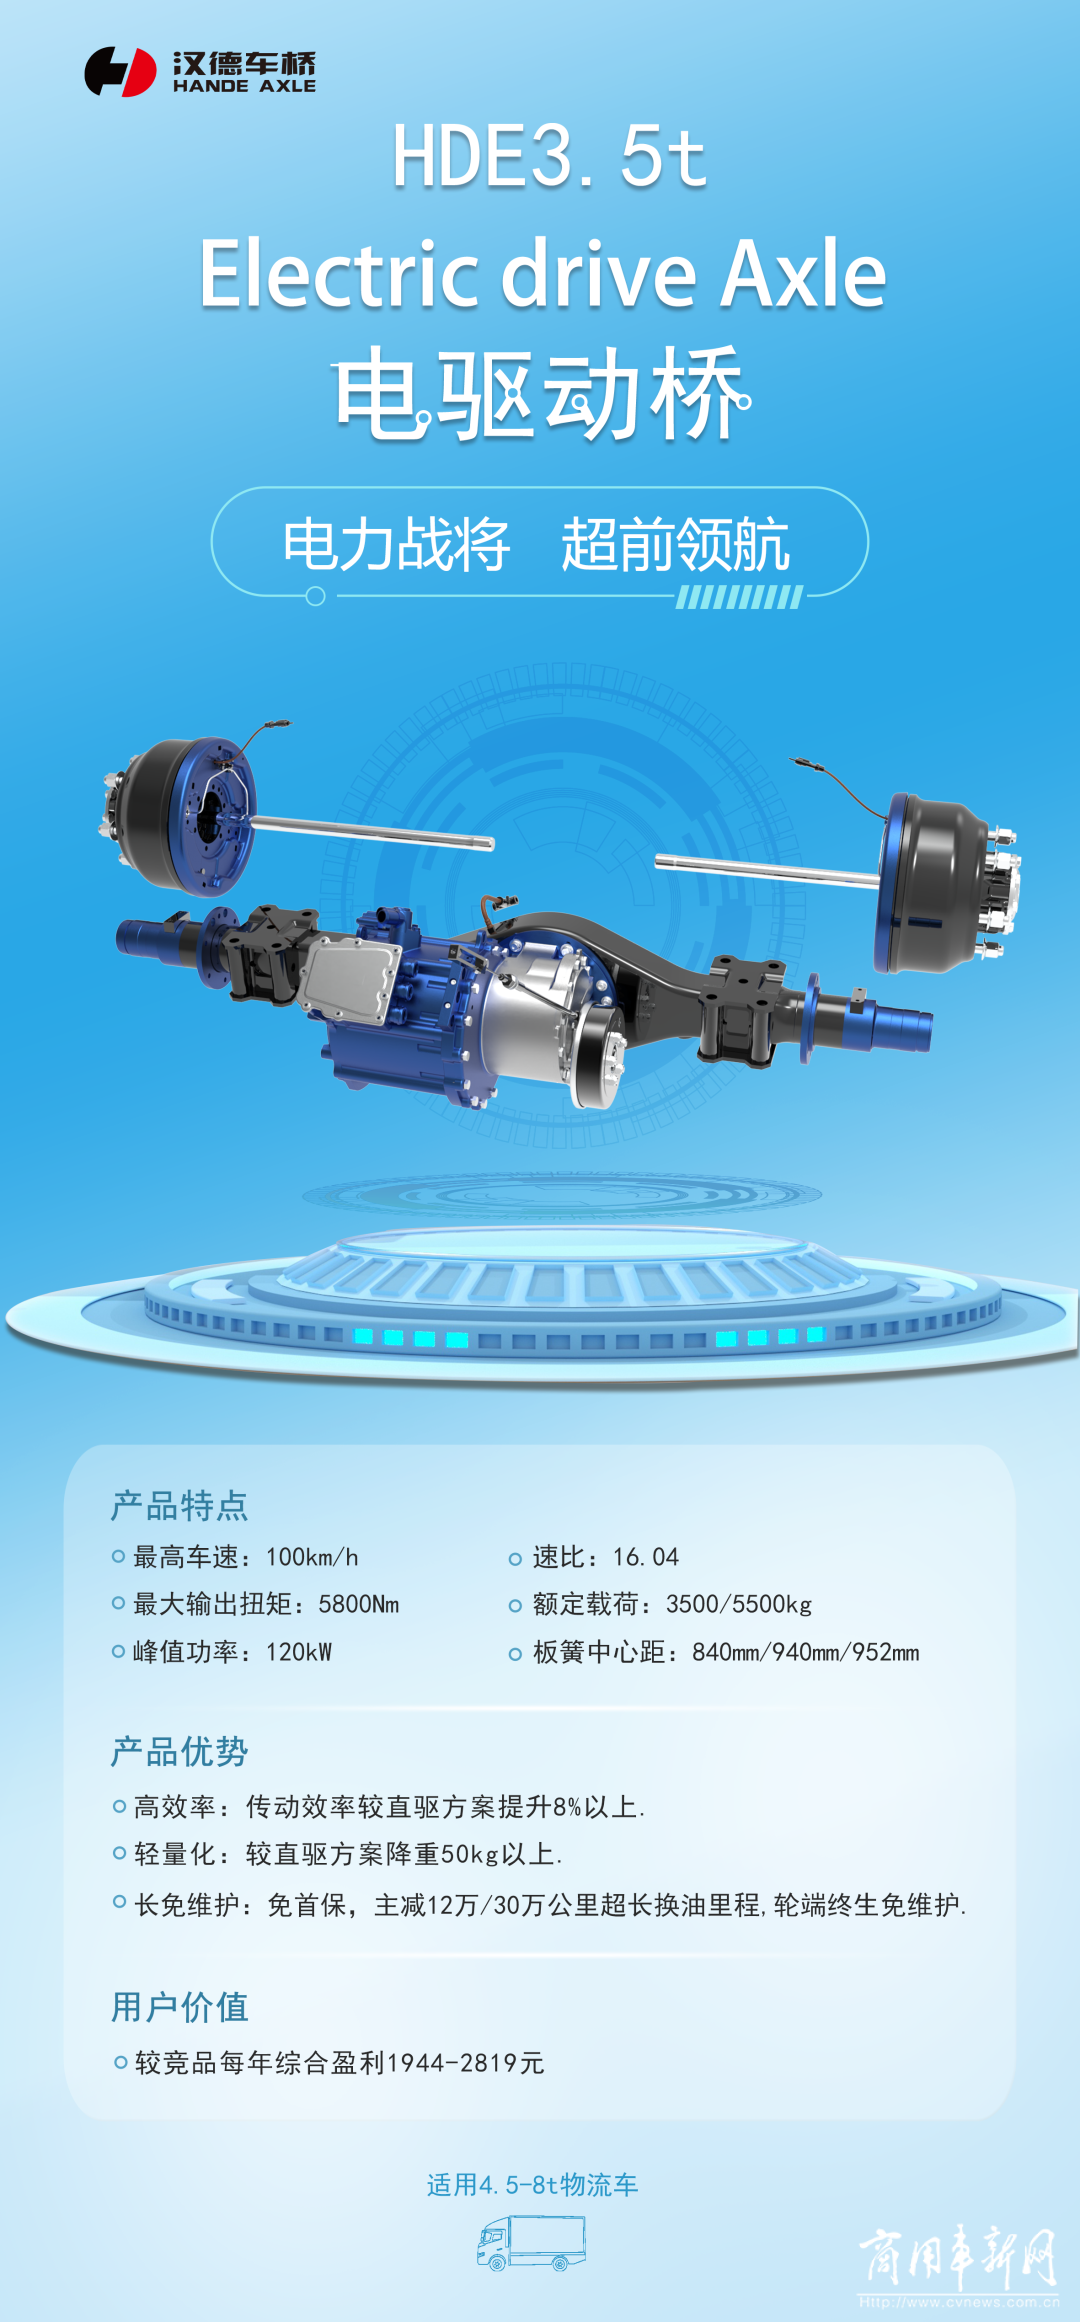 HDE3.5t Electric drive Axle 电驱动桥